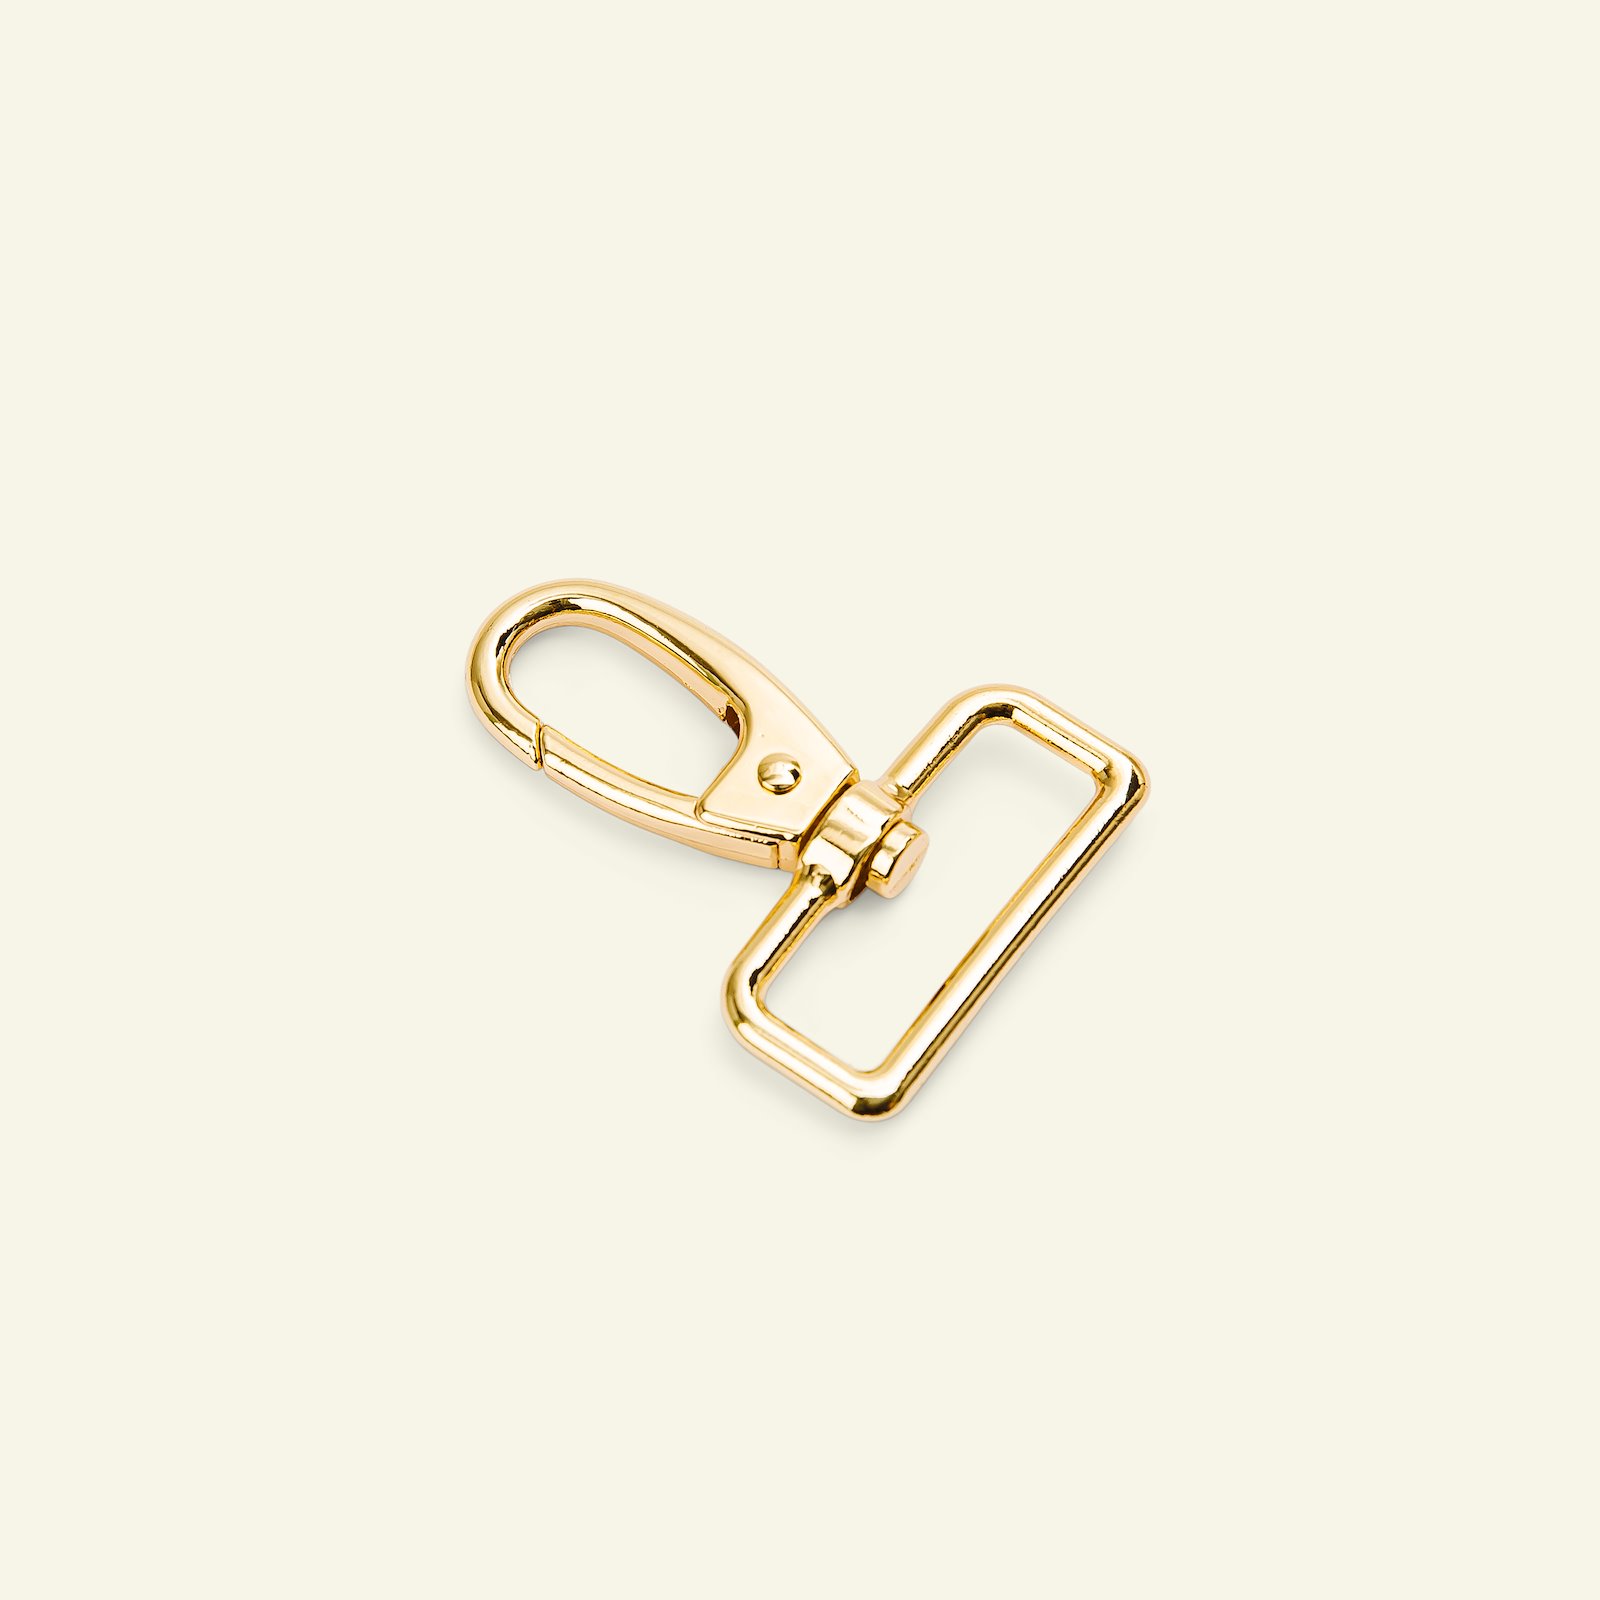 Snap hook metal 38x60mm gold colored 1pc 45111_pack